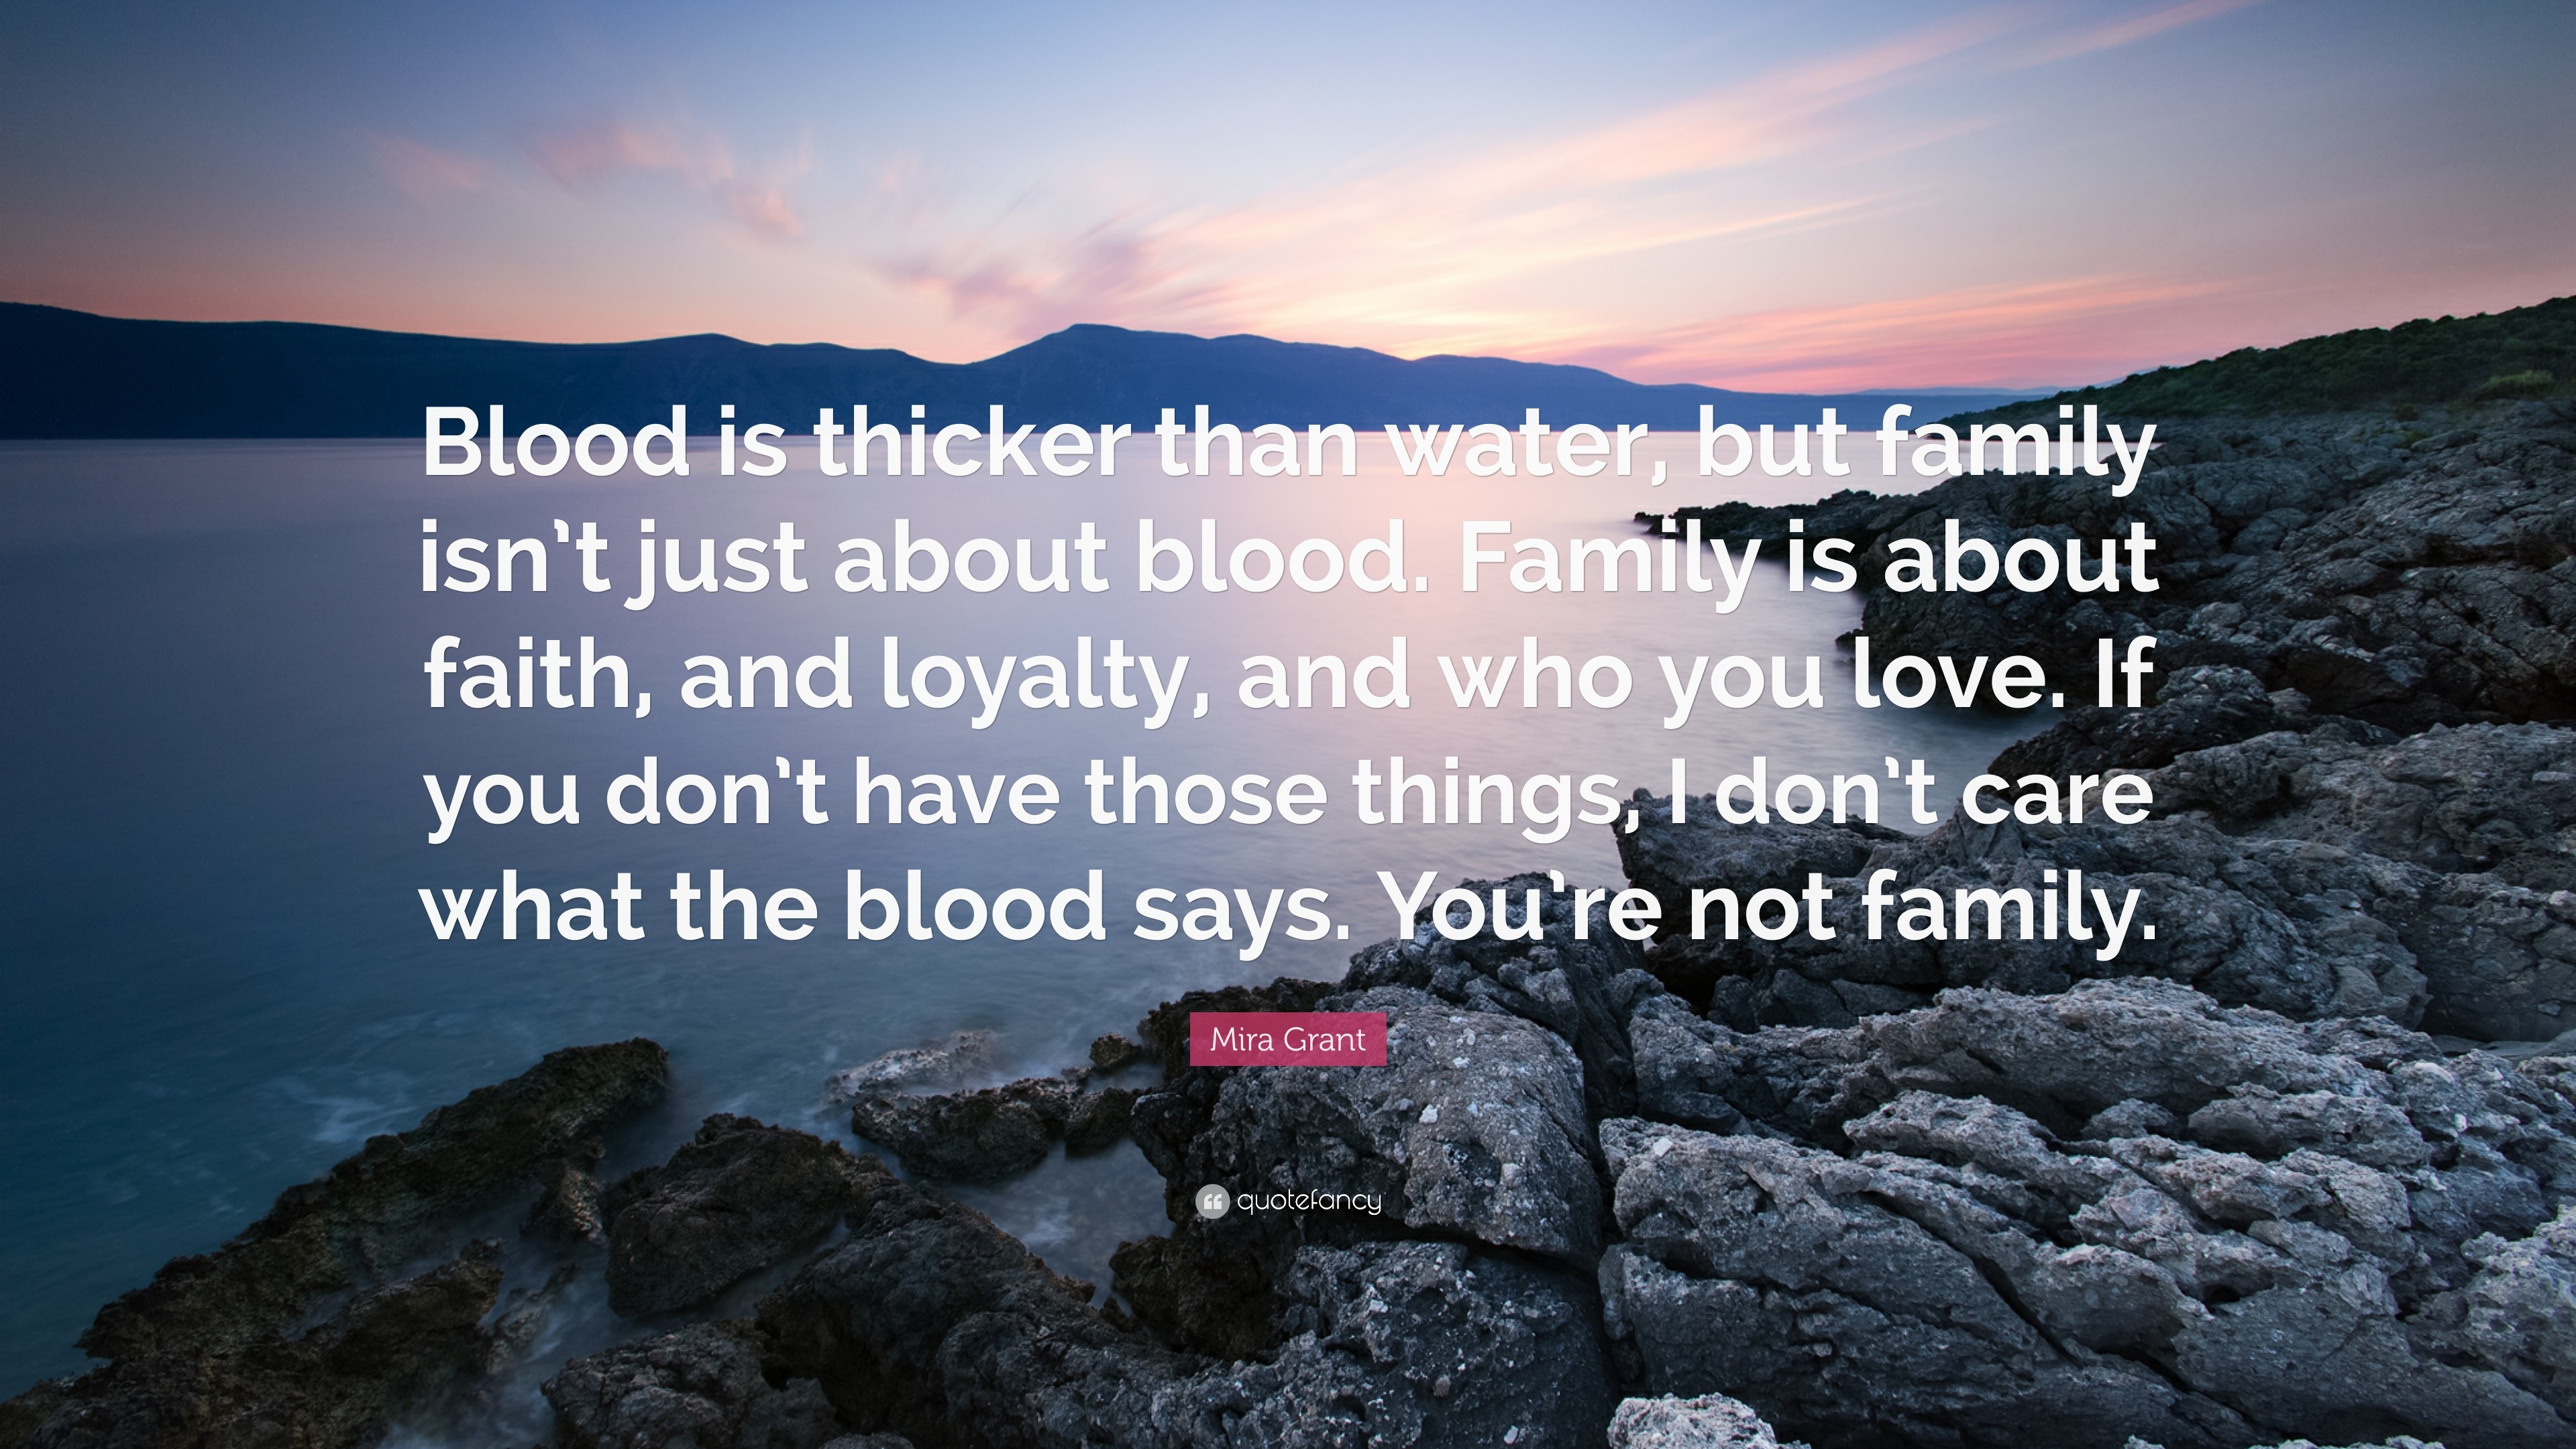 Mira Grant Quote: Blood is thicker than water, but family isnâ€™t just